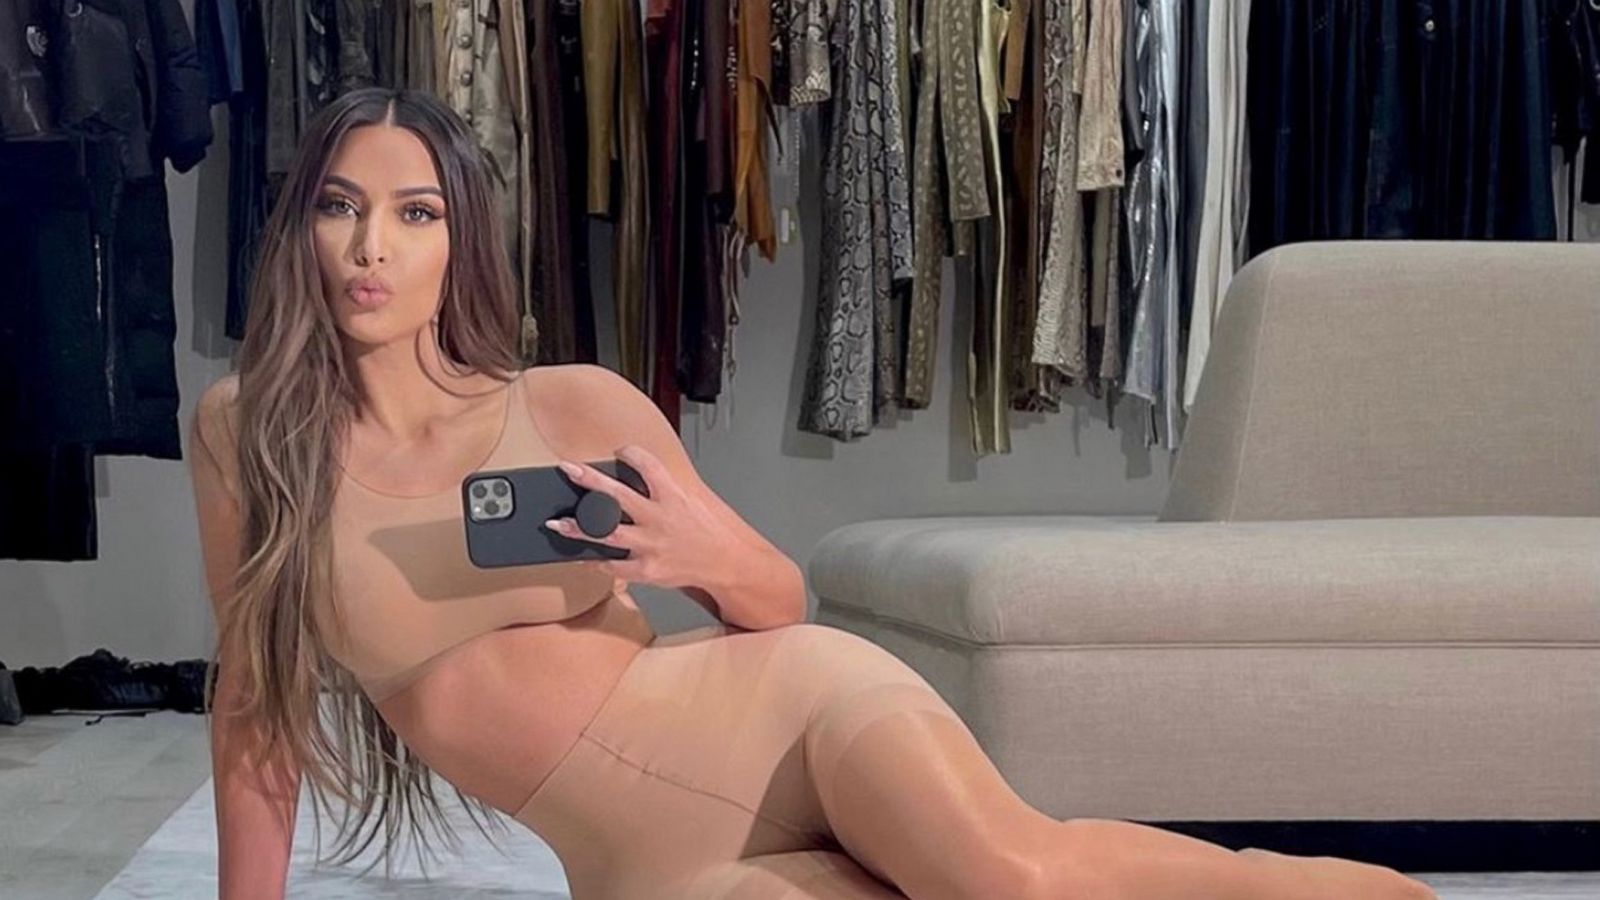 Kim Kardashian - COMING SOON: New SKIMS Solutionwear™ styles! Our game  changing shapewear collection is getting a major update: introducing new  pieces and new features on our most popular styles - all